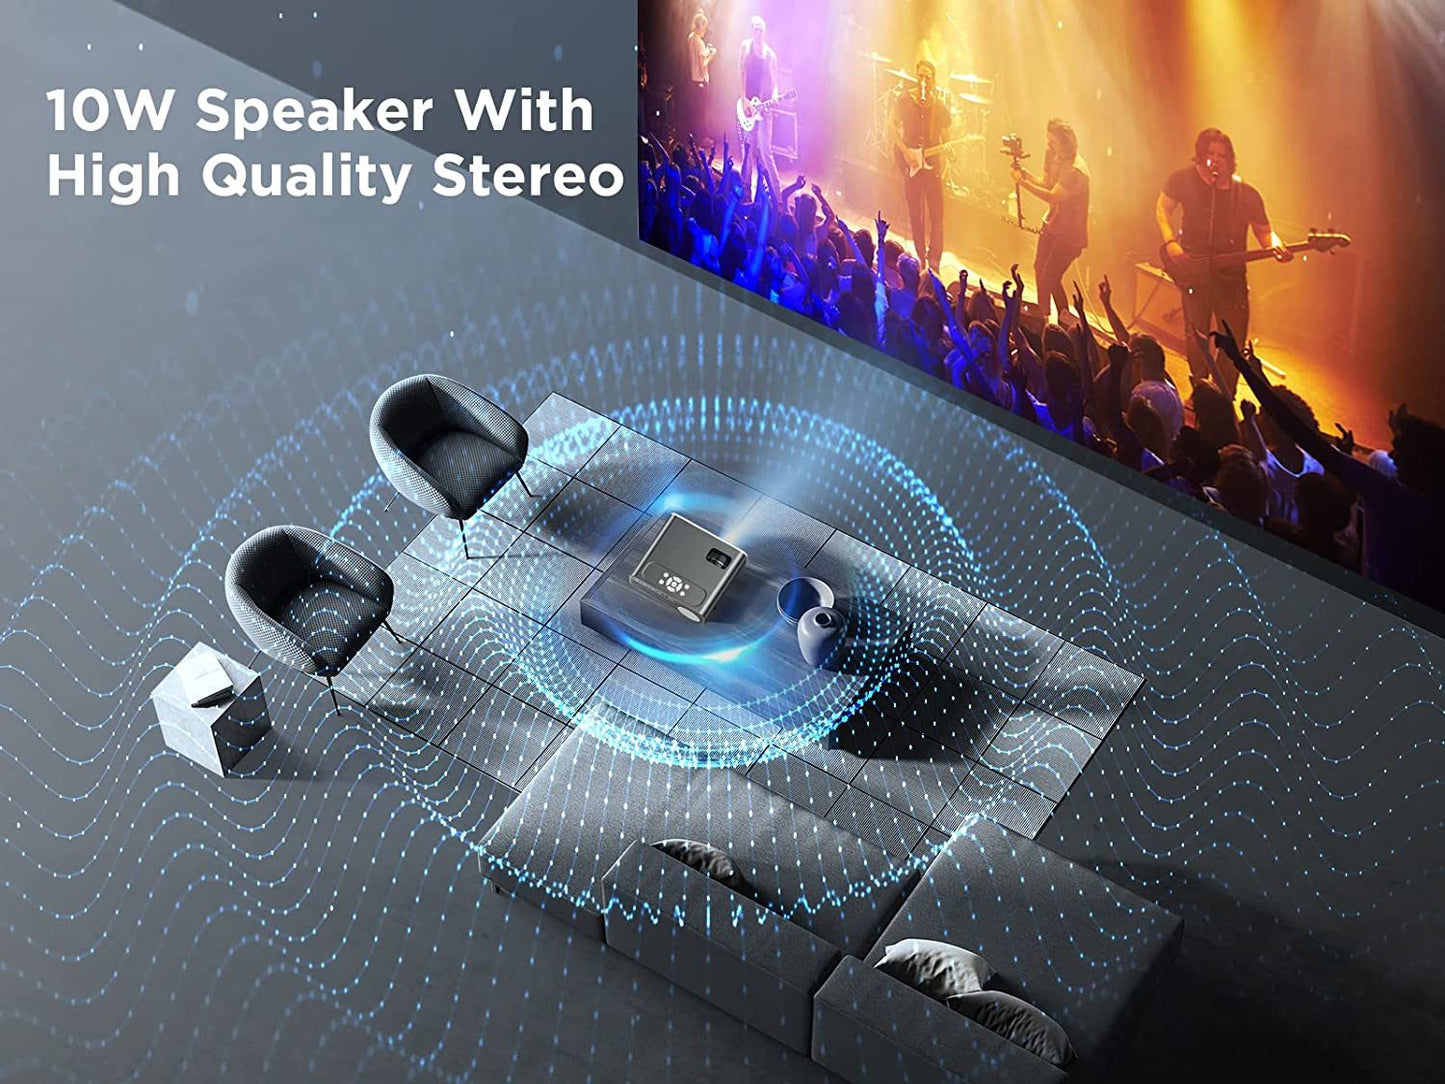 Projector with 5G WiFi and Bluetooth, VACASSO Native 1080P Portable Projector 4K Supported with Tripod, 11000L Movie Home Projector Compatible with HDMI/TV Stick/iOS/Android/PS5